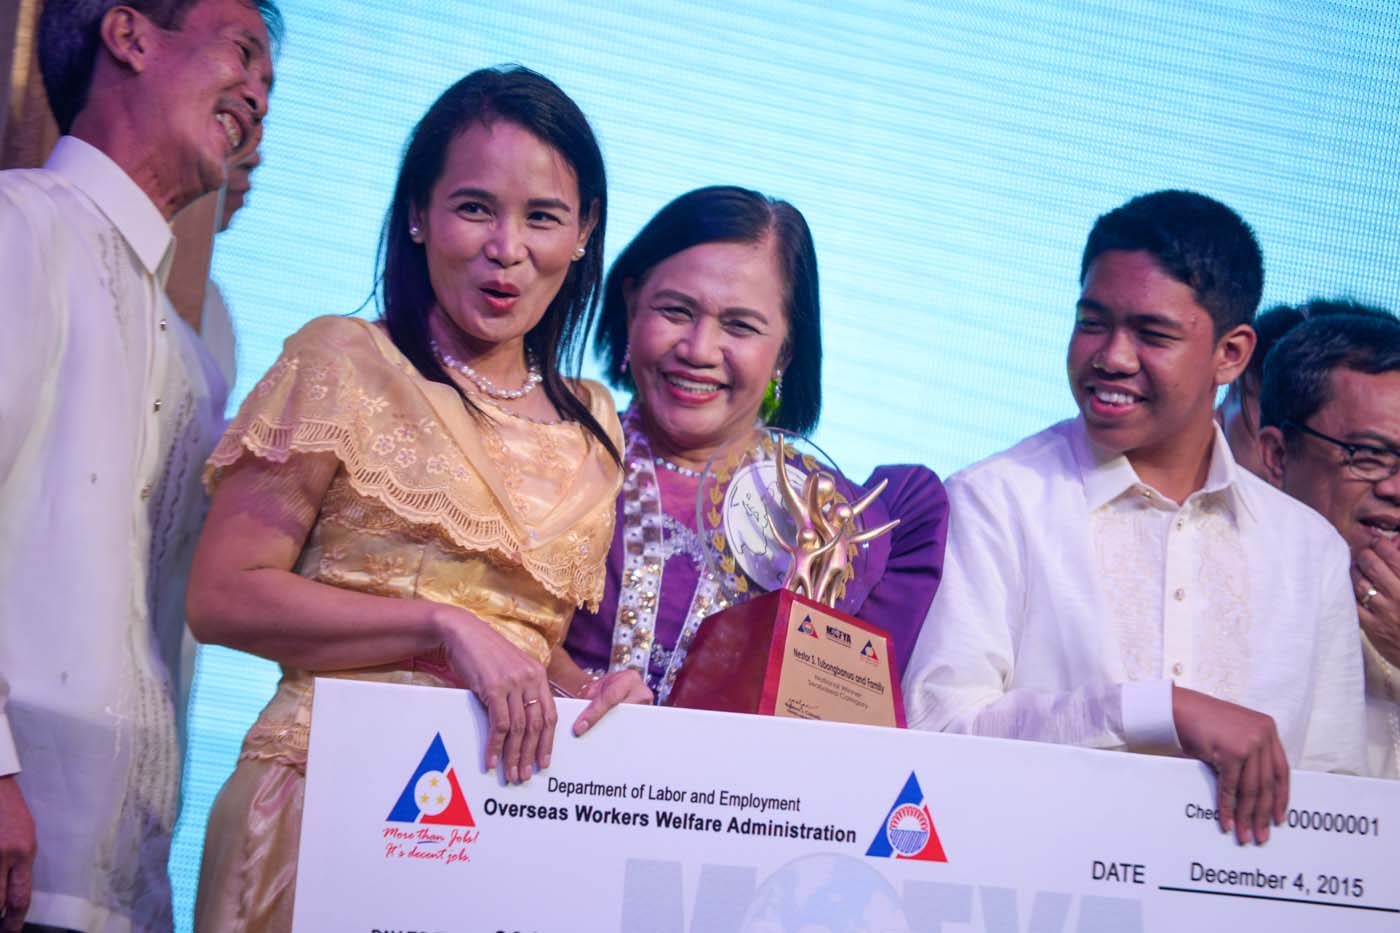 HAPPY WINNERS. Rebecca (2nd from right) and Ralph (1st from right) Tubongbanua onstage as they receive their award.